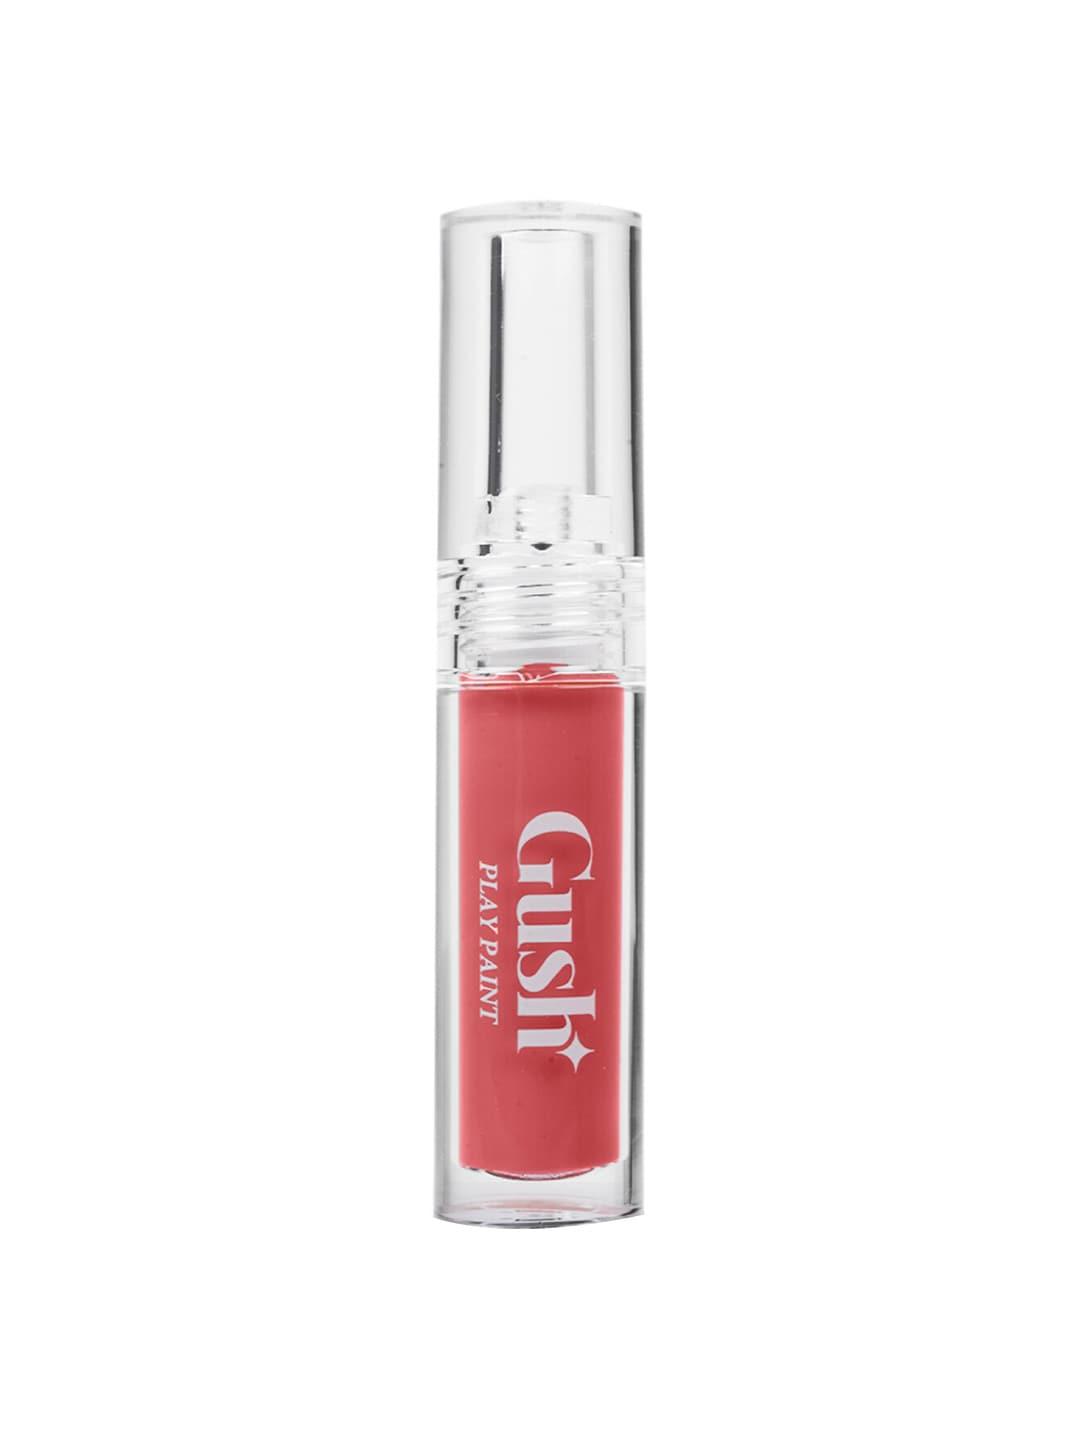 Gush Beauty PlayPaint Matte Airy Fluid Lipstick 2.8 g - My Own Muse 05